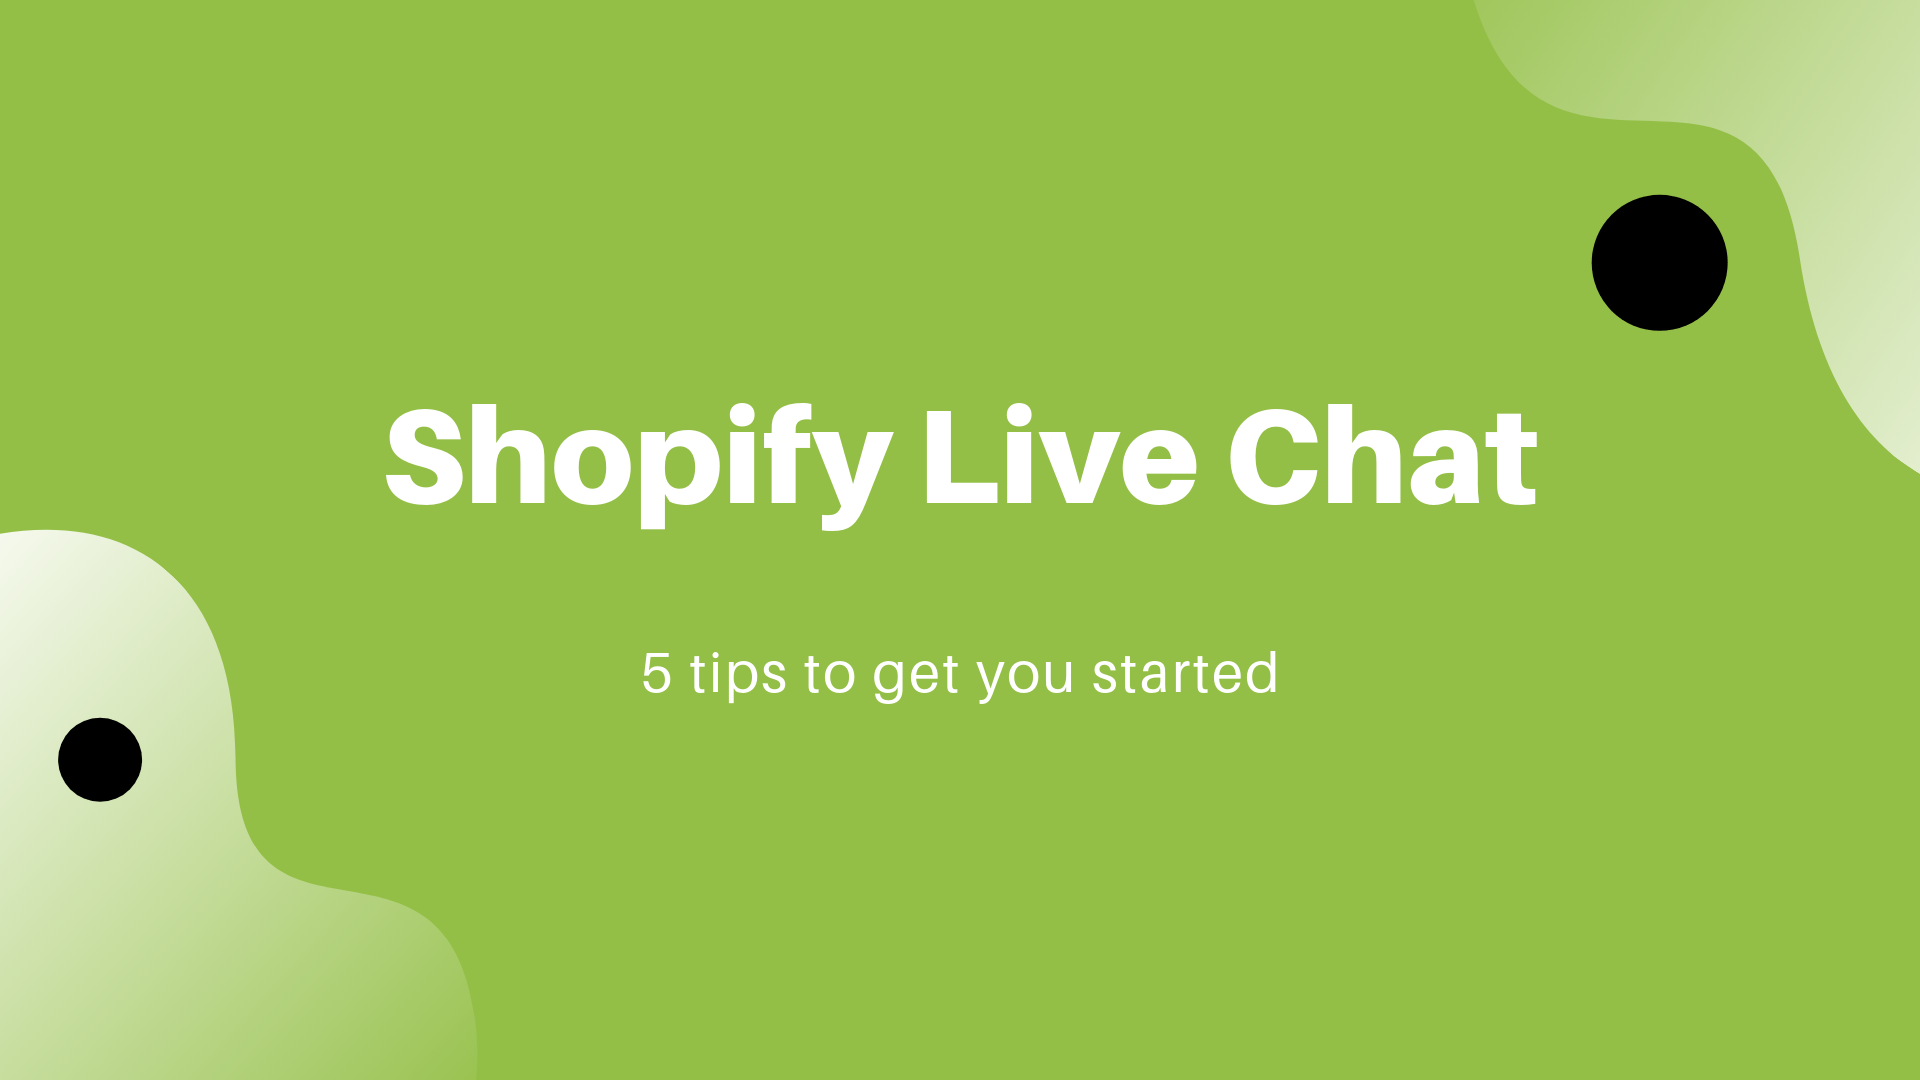 Shopify Live Chat: 5 tips to get you started